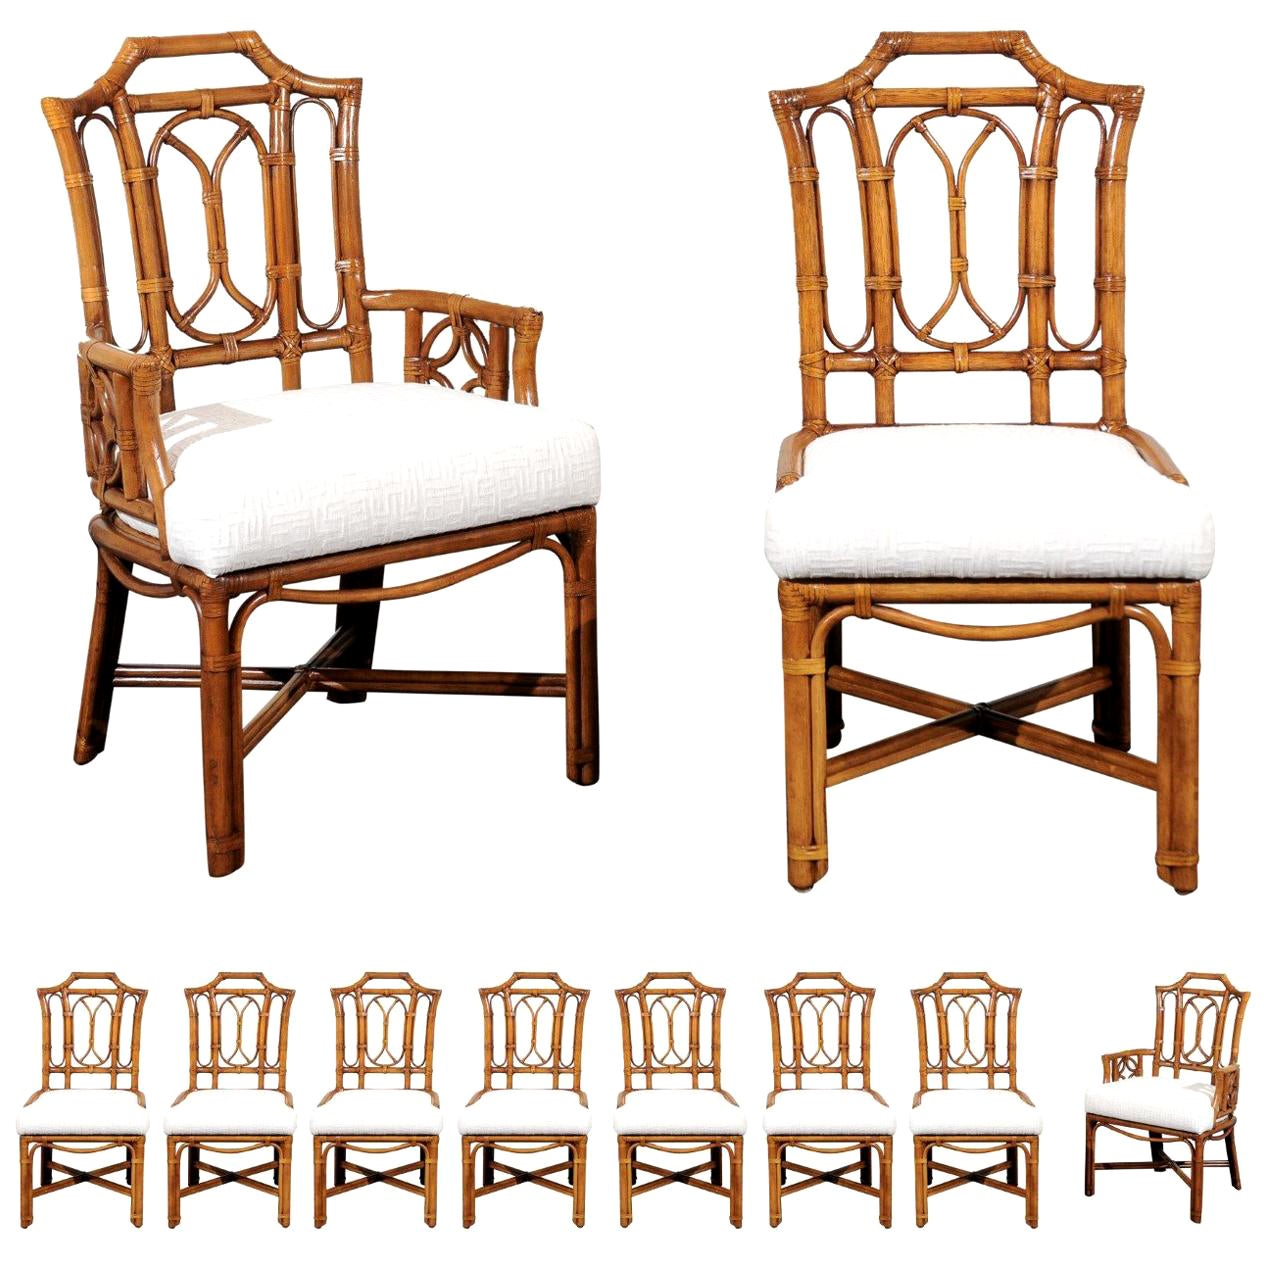 Majestic Restored Set of 8 Pagoda Style High Back Dining Chairs by Ficks Reed